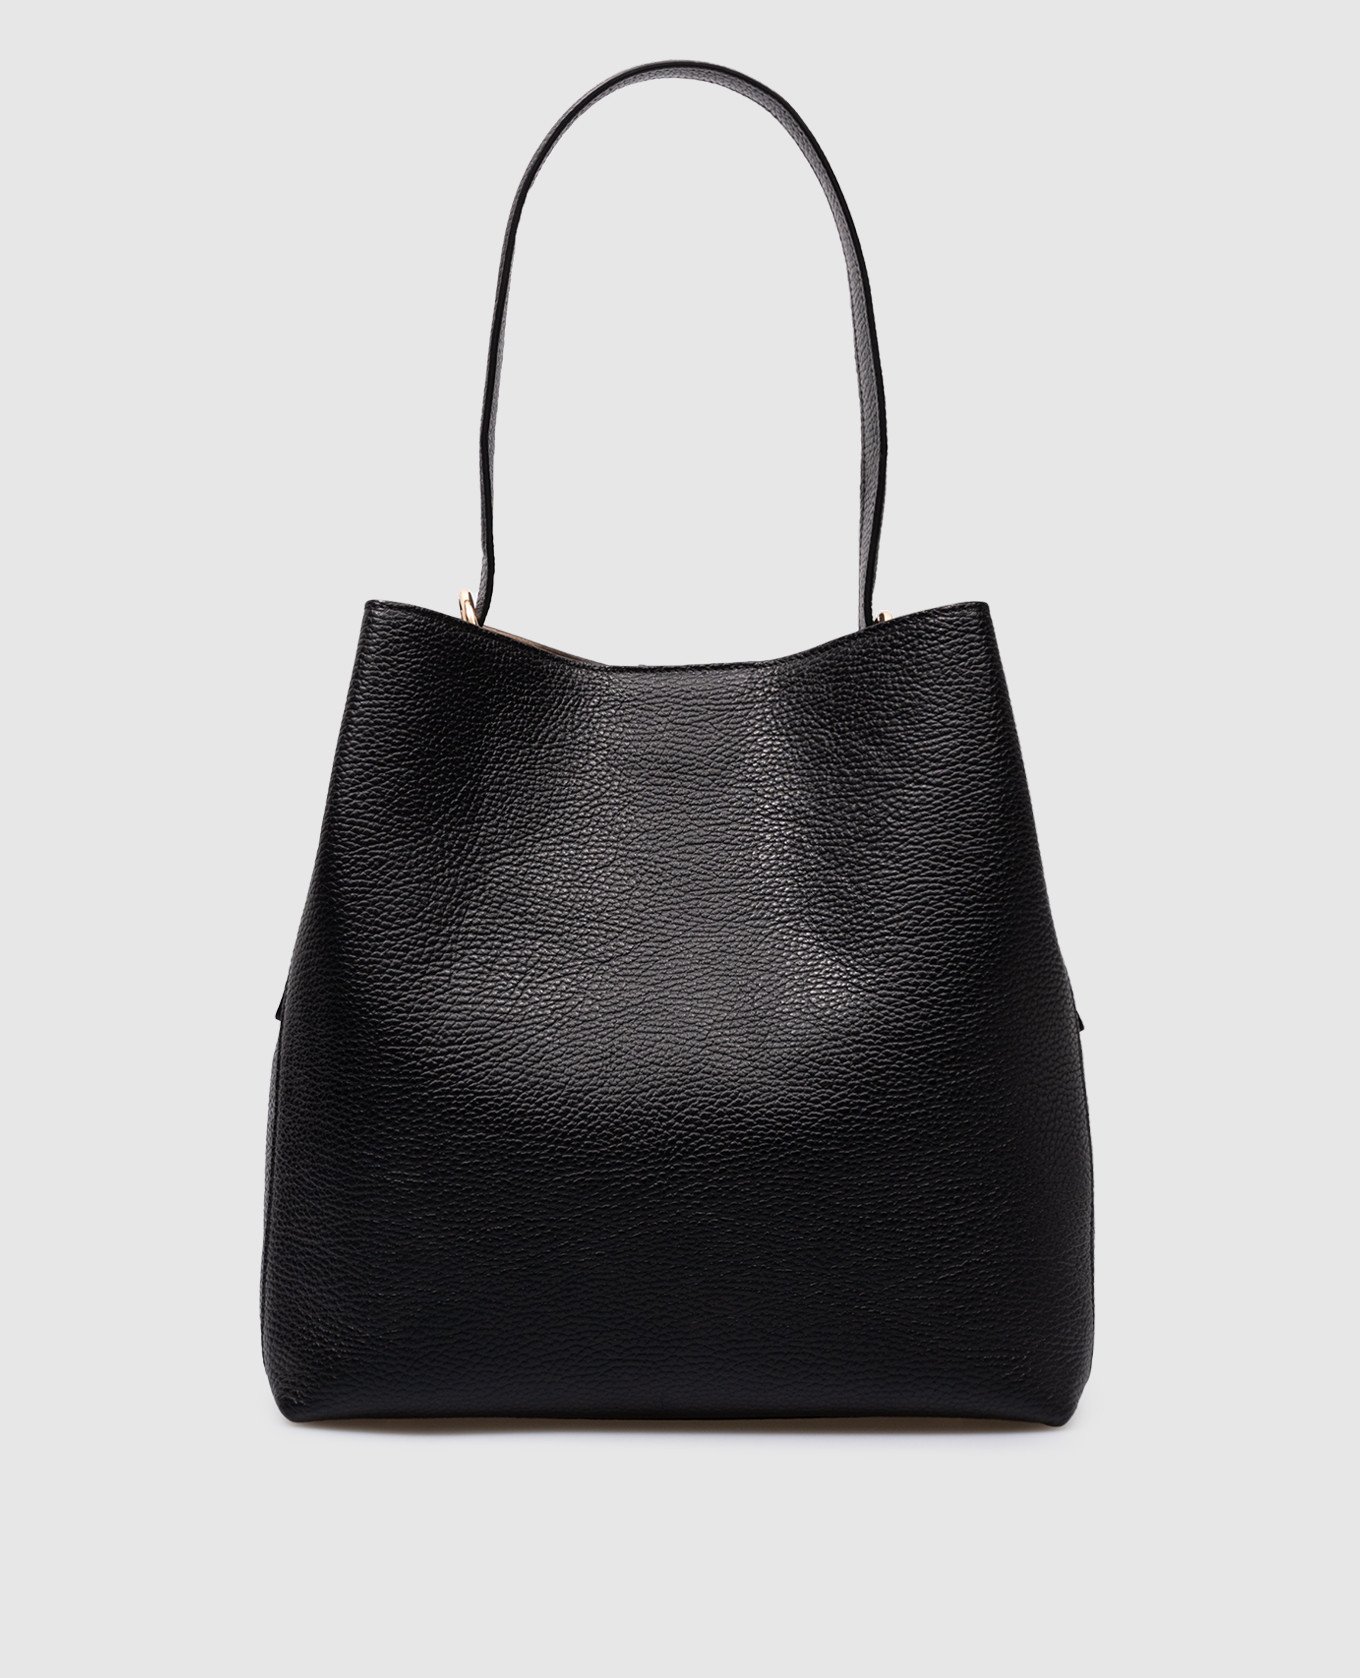 Black leather bag with embossed grain